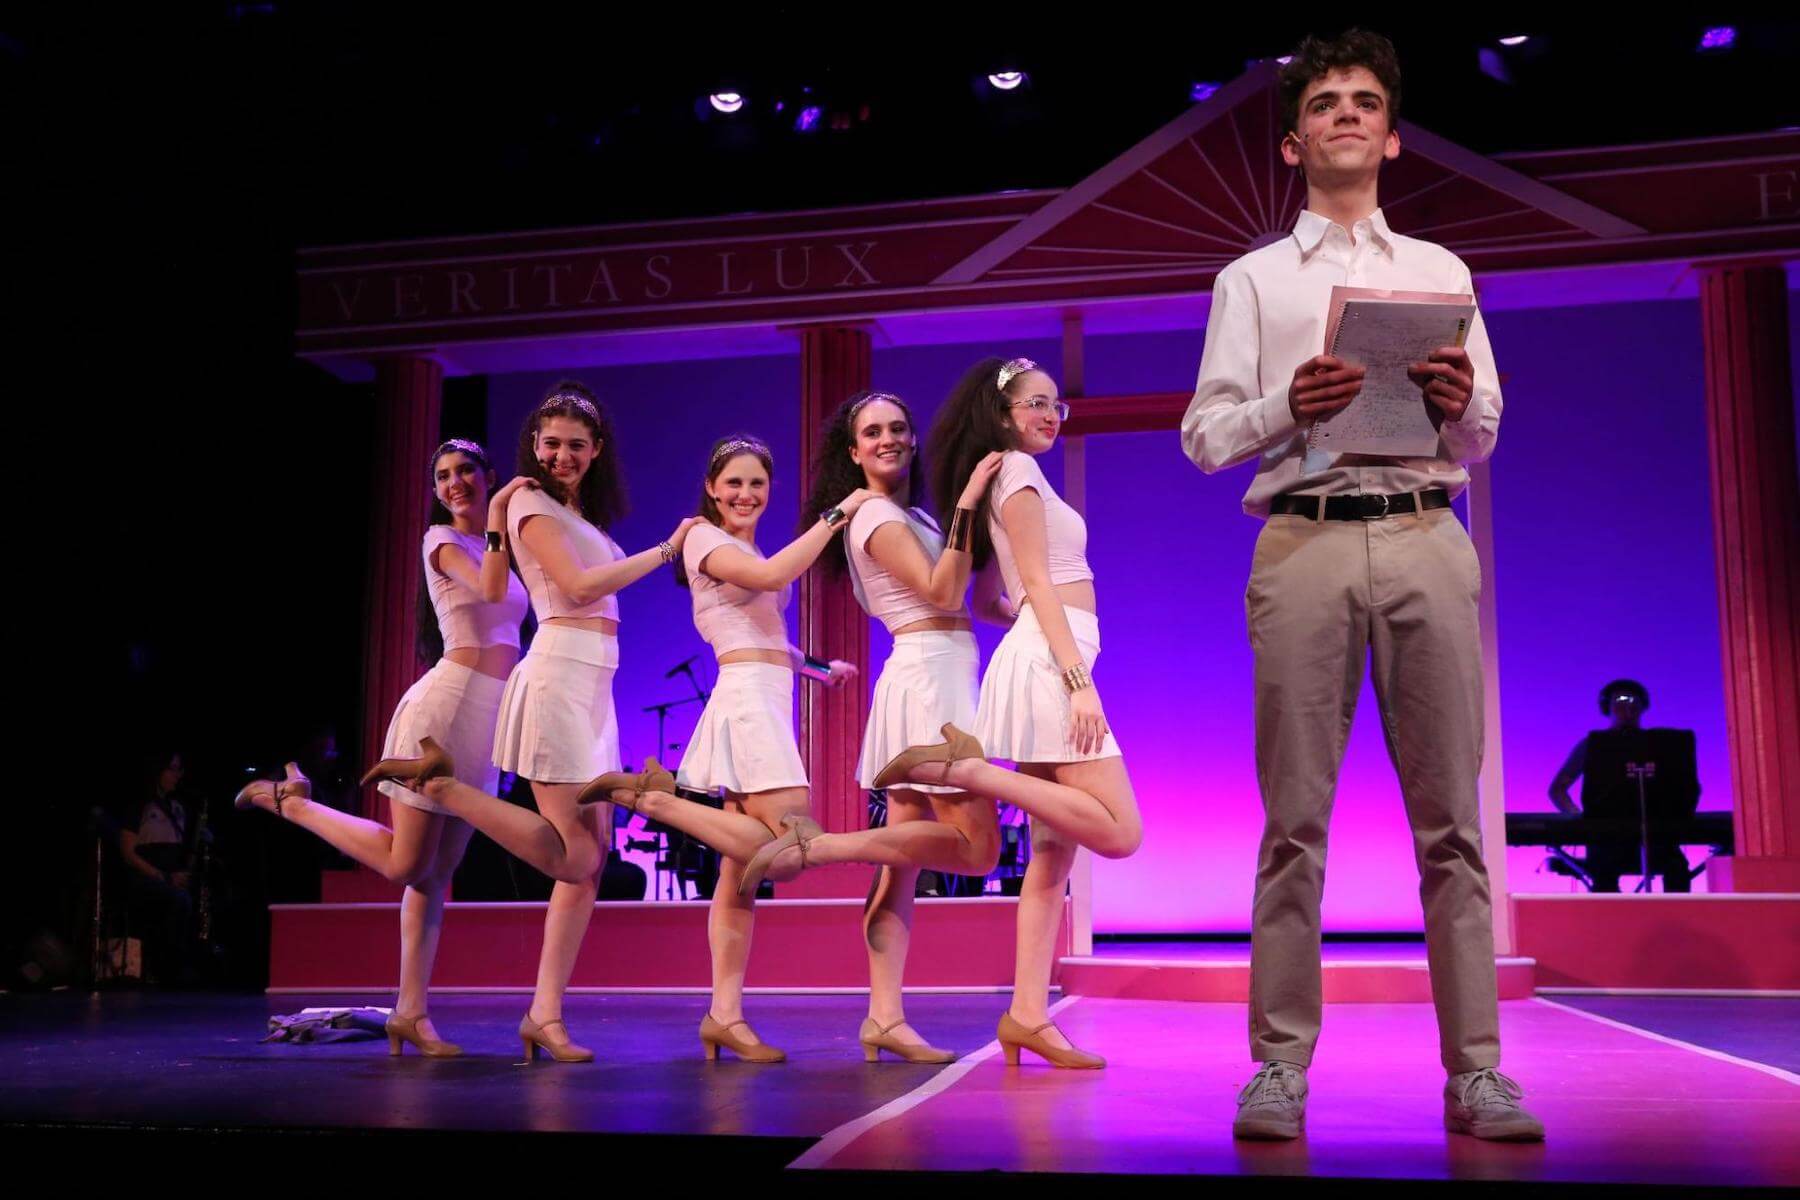 Four Ethical Culture Fieldston Upper School students pose onstage while one student stands in front of them in Legally Blonde.